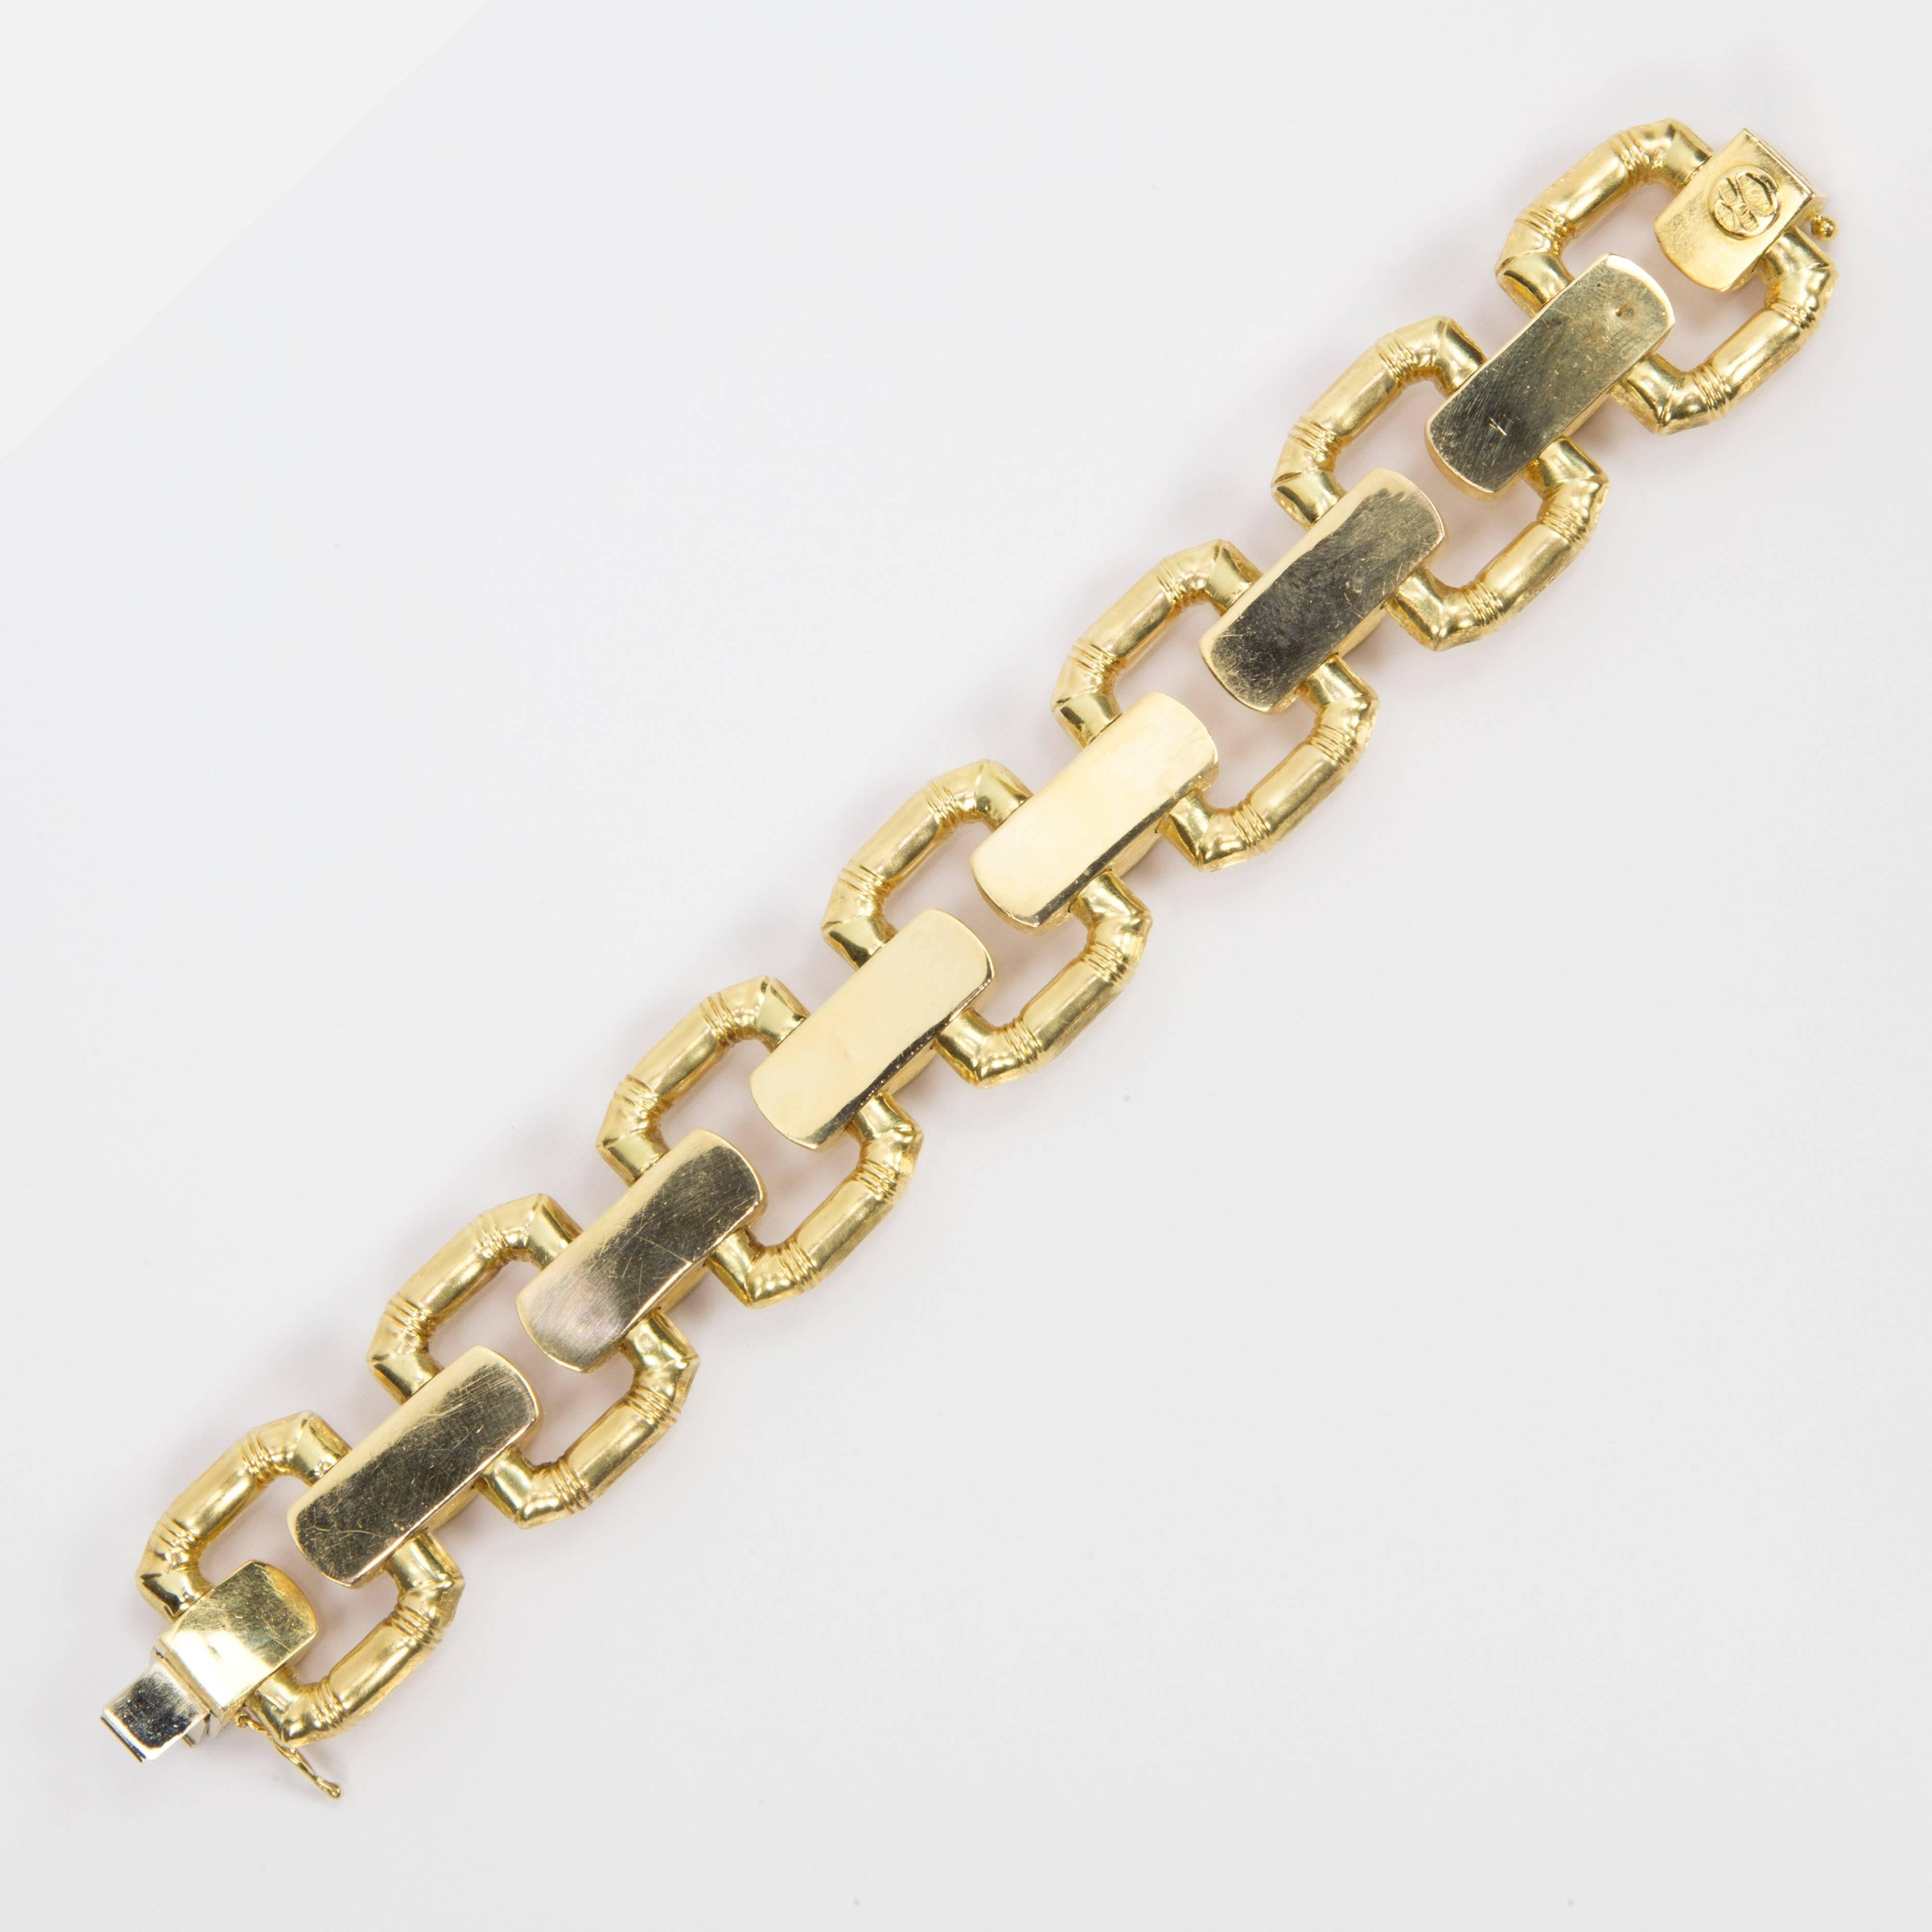 Bold Modernist Gate Link Runway Bracelet features seven large links inter-spaced with rectangular tube panels, creating a streamlined effect. Brushed finish; Handcrafted; It measures 7.5" in length by 1" wide; hidden clasp closure; marked: